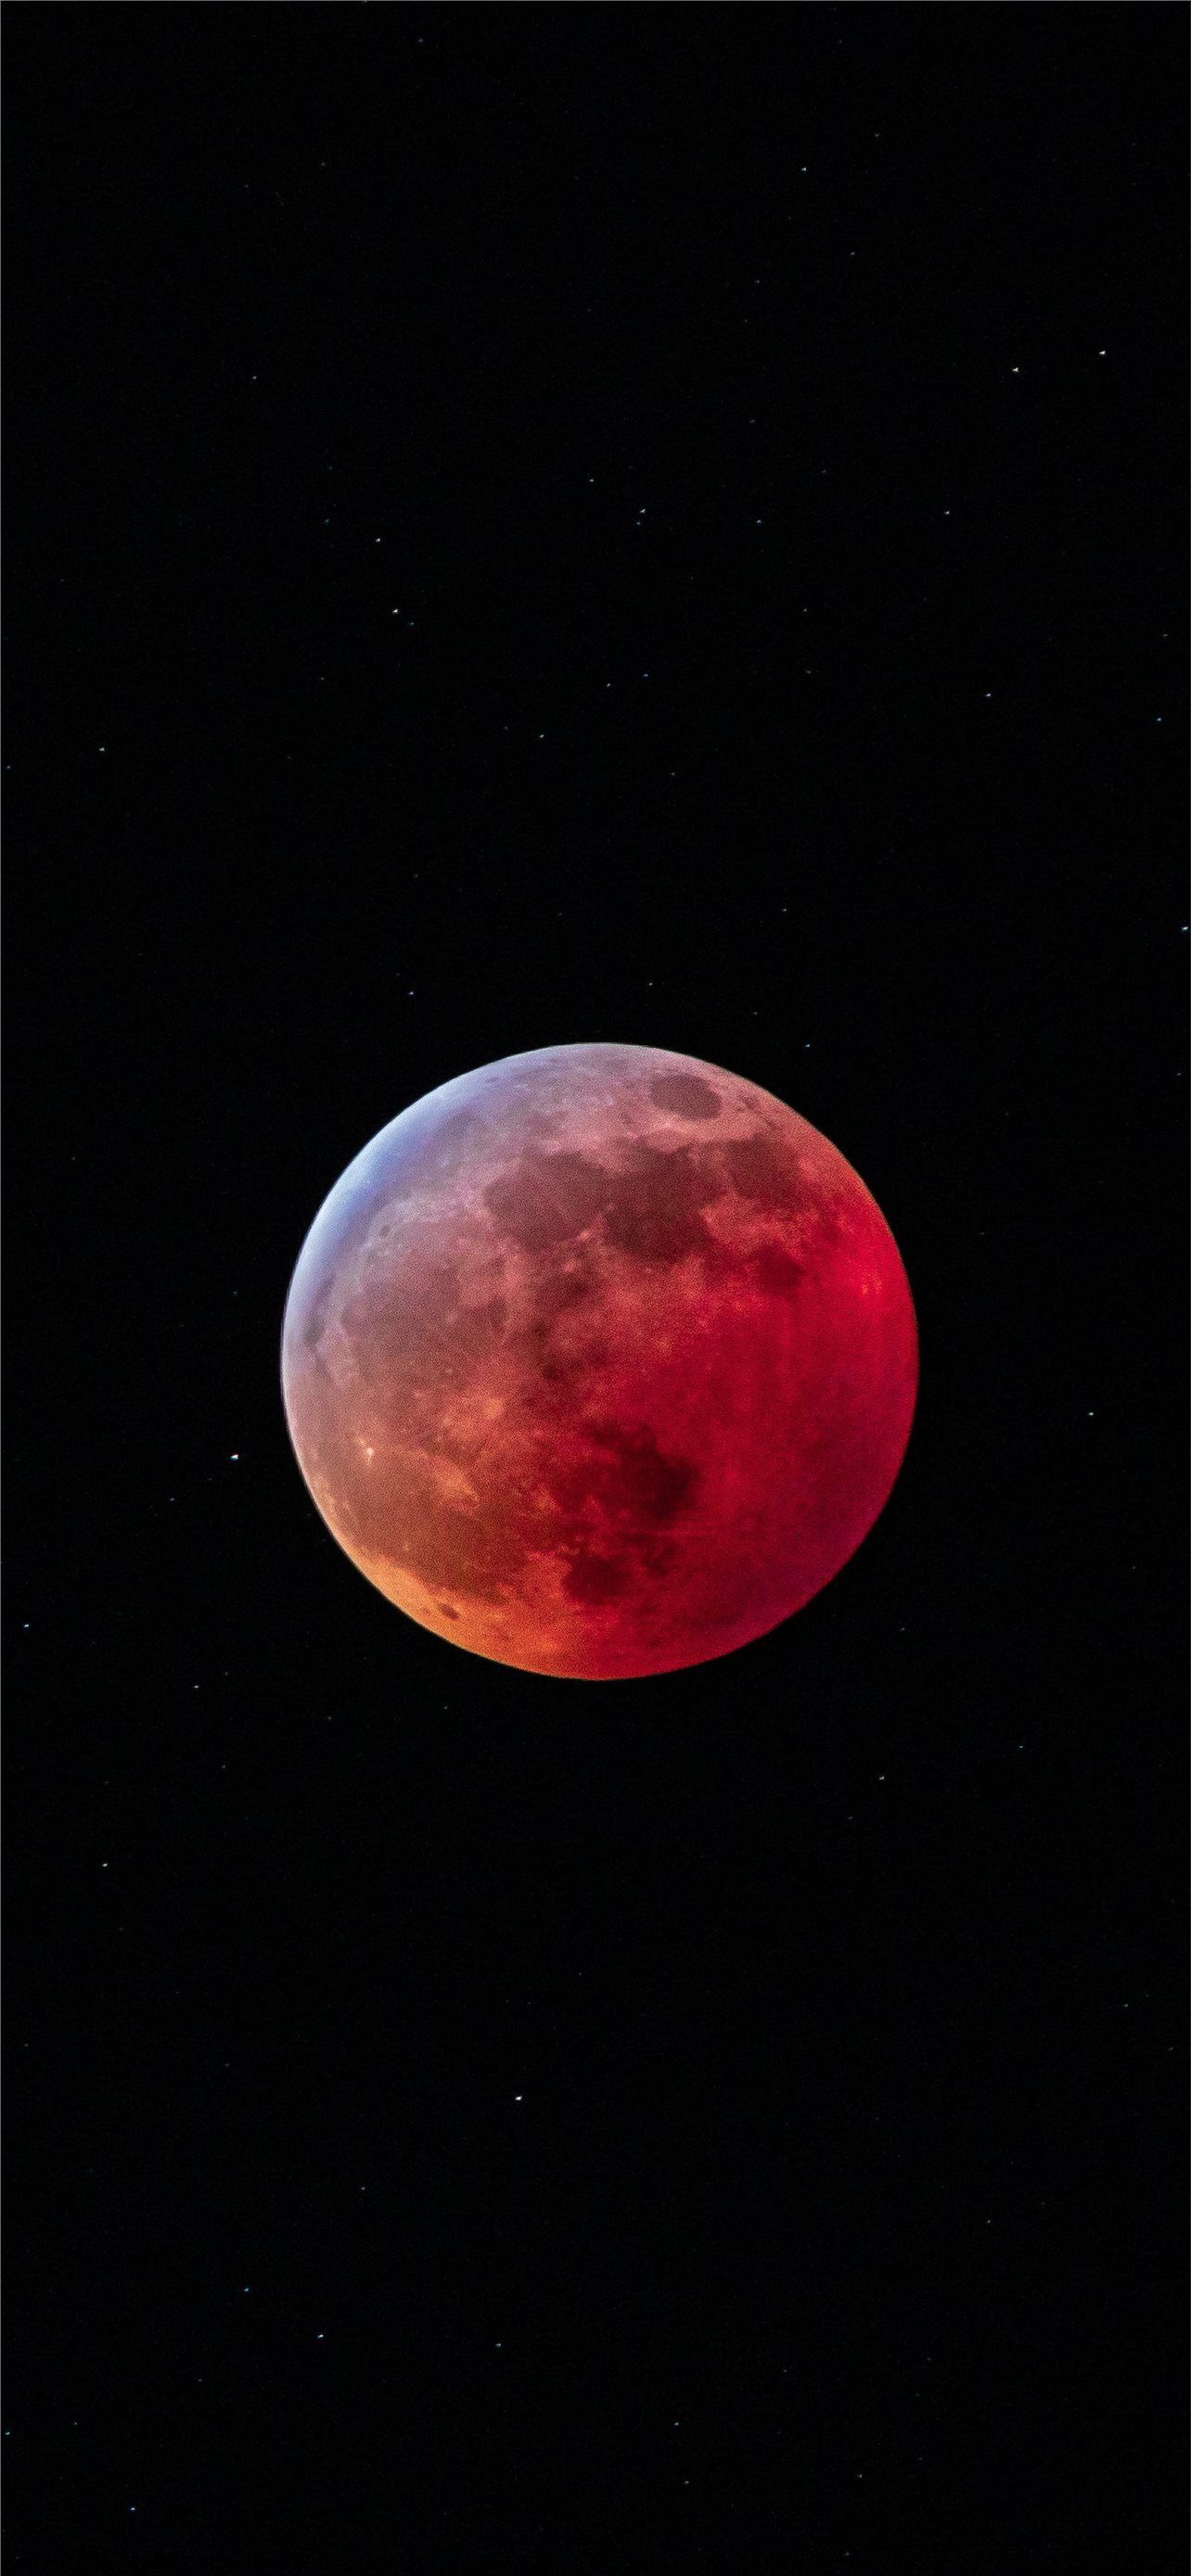 IPhone wallpaper of the super blood moon in the night sky - Blood, dark red